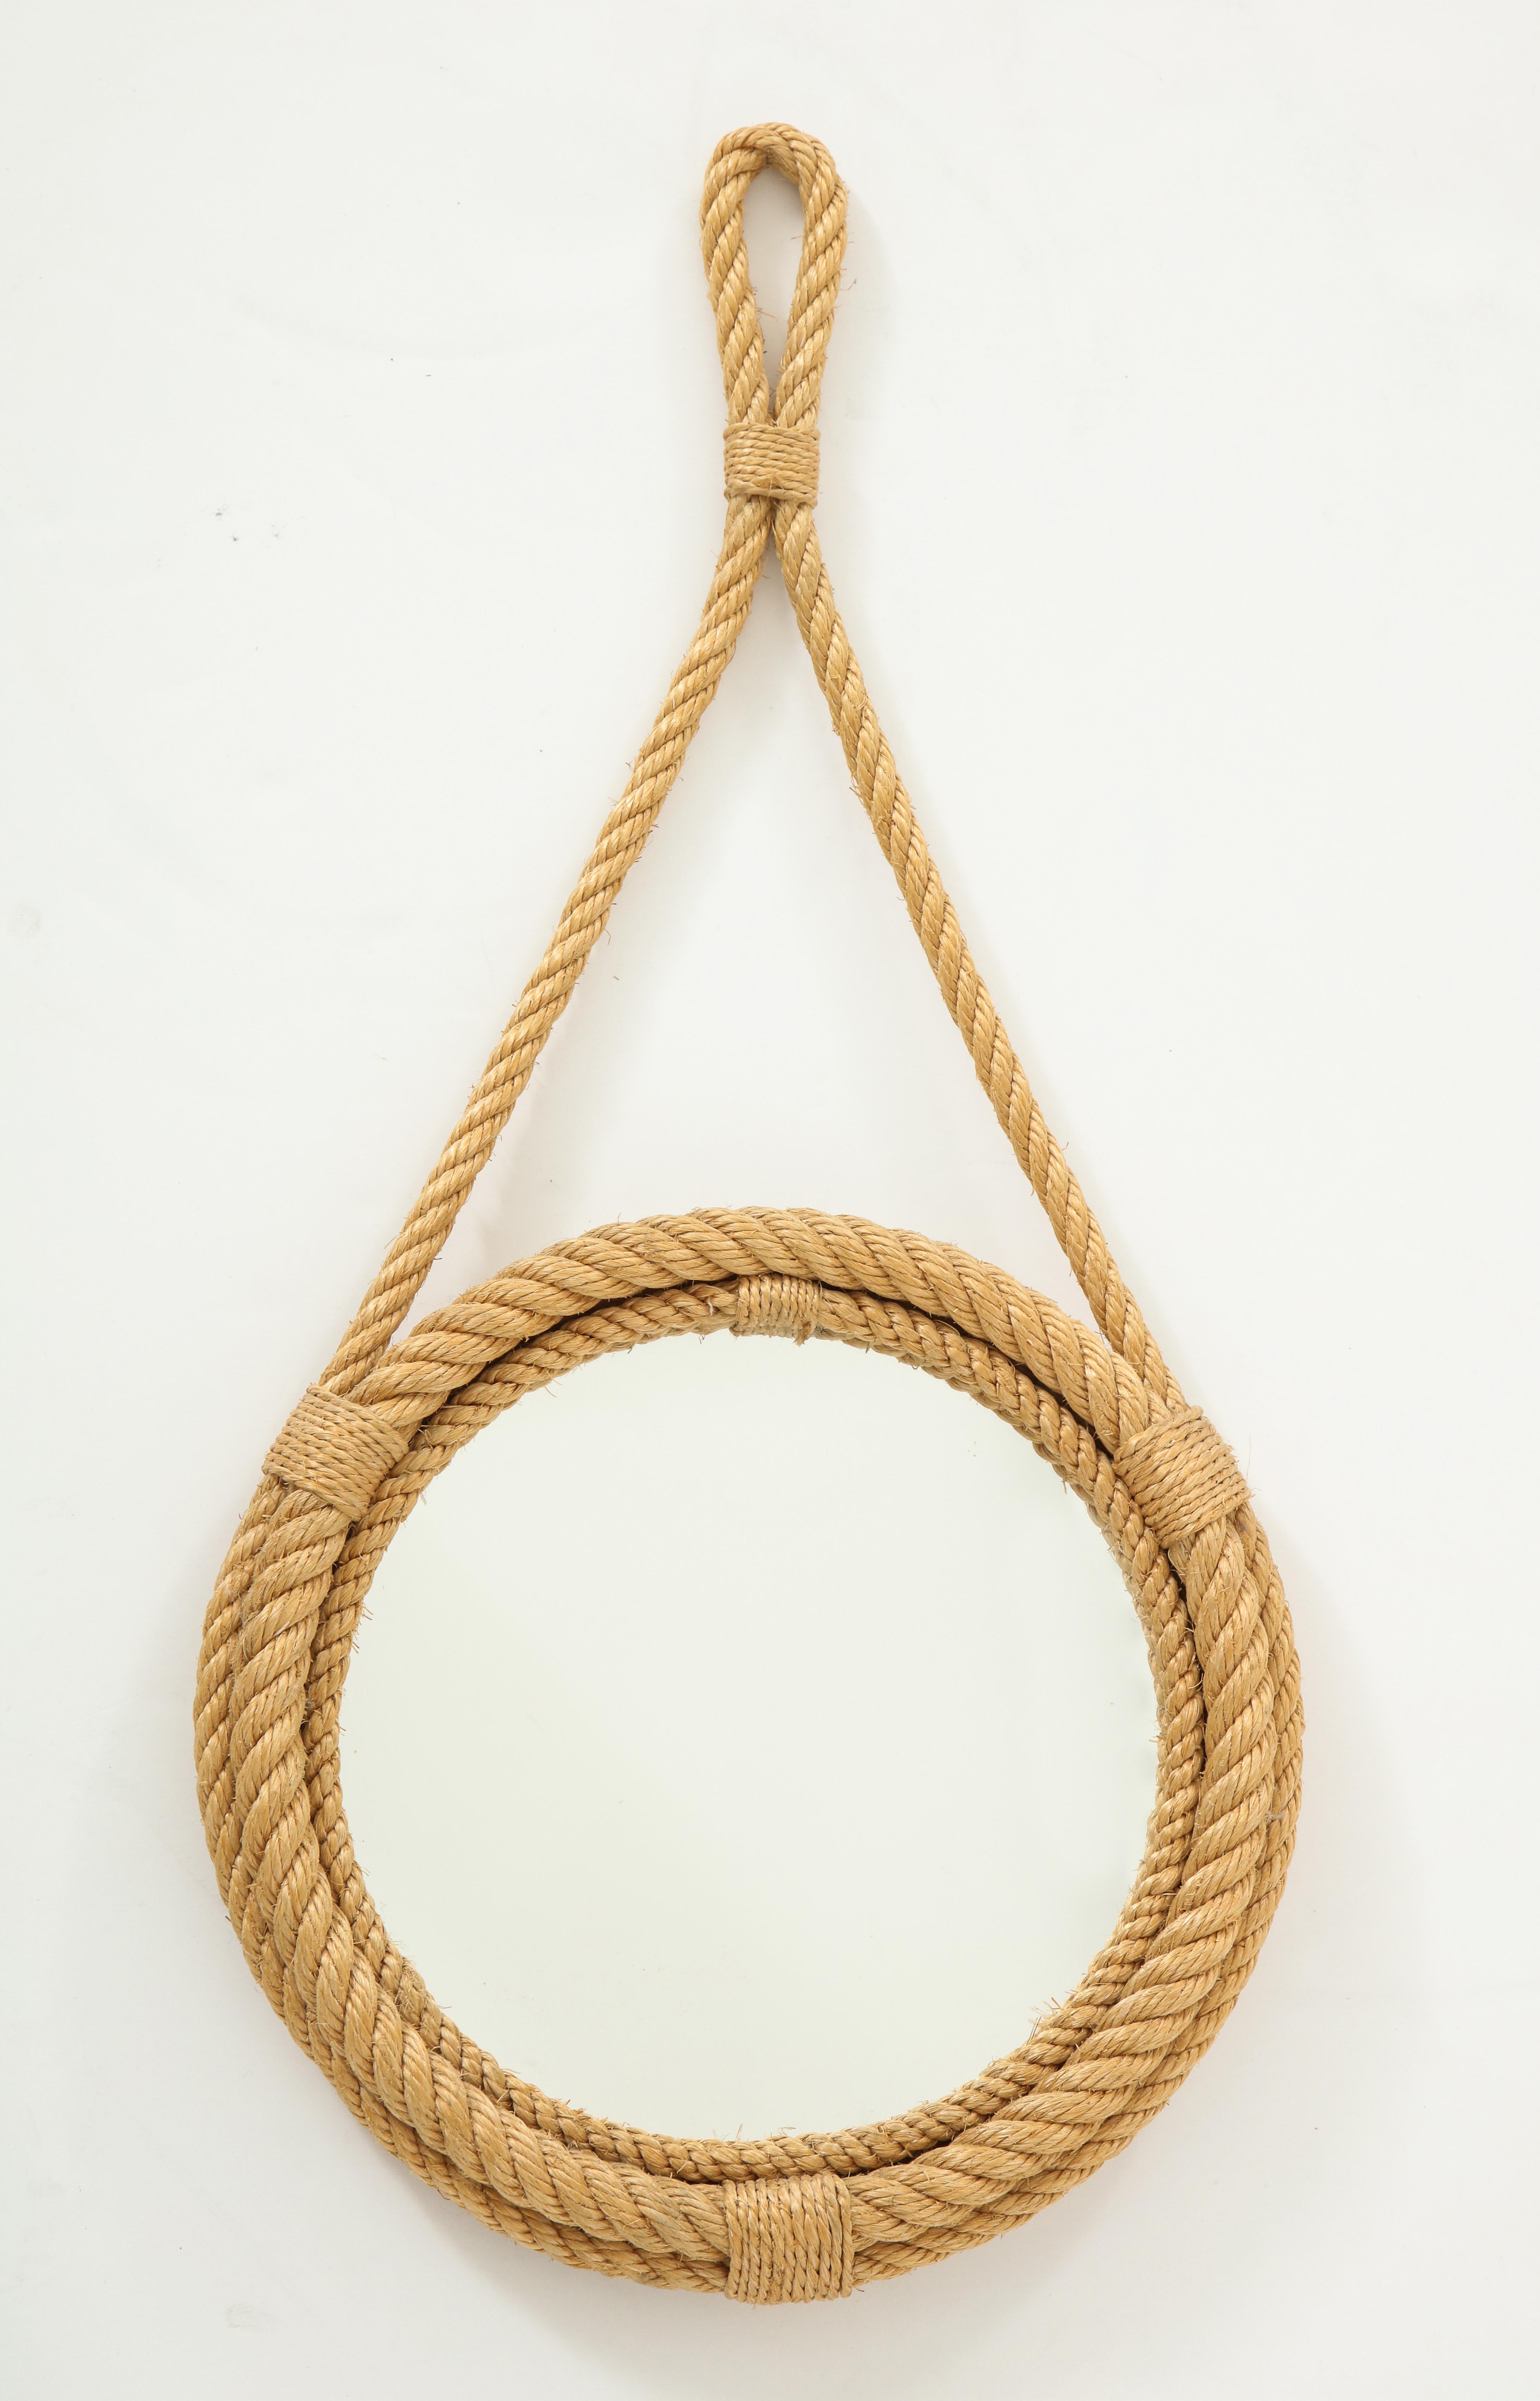 Petite rope hanging round wall mirror by iconic designer duo Audoux Minet, Adrien Audoux and Frida Minet. Golfe-Juan, French Riviera, 1960s. Very good vintage condition.
 